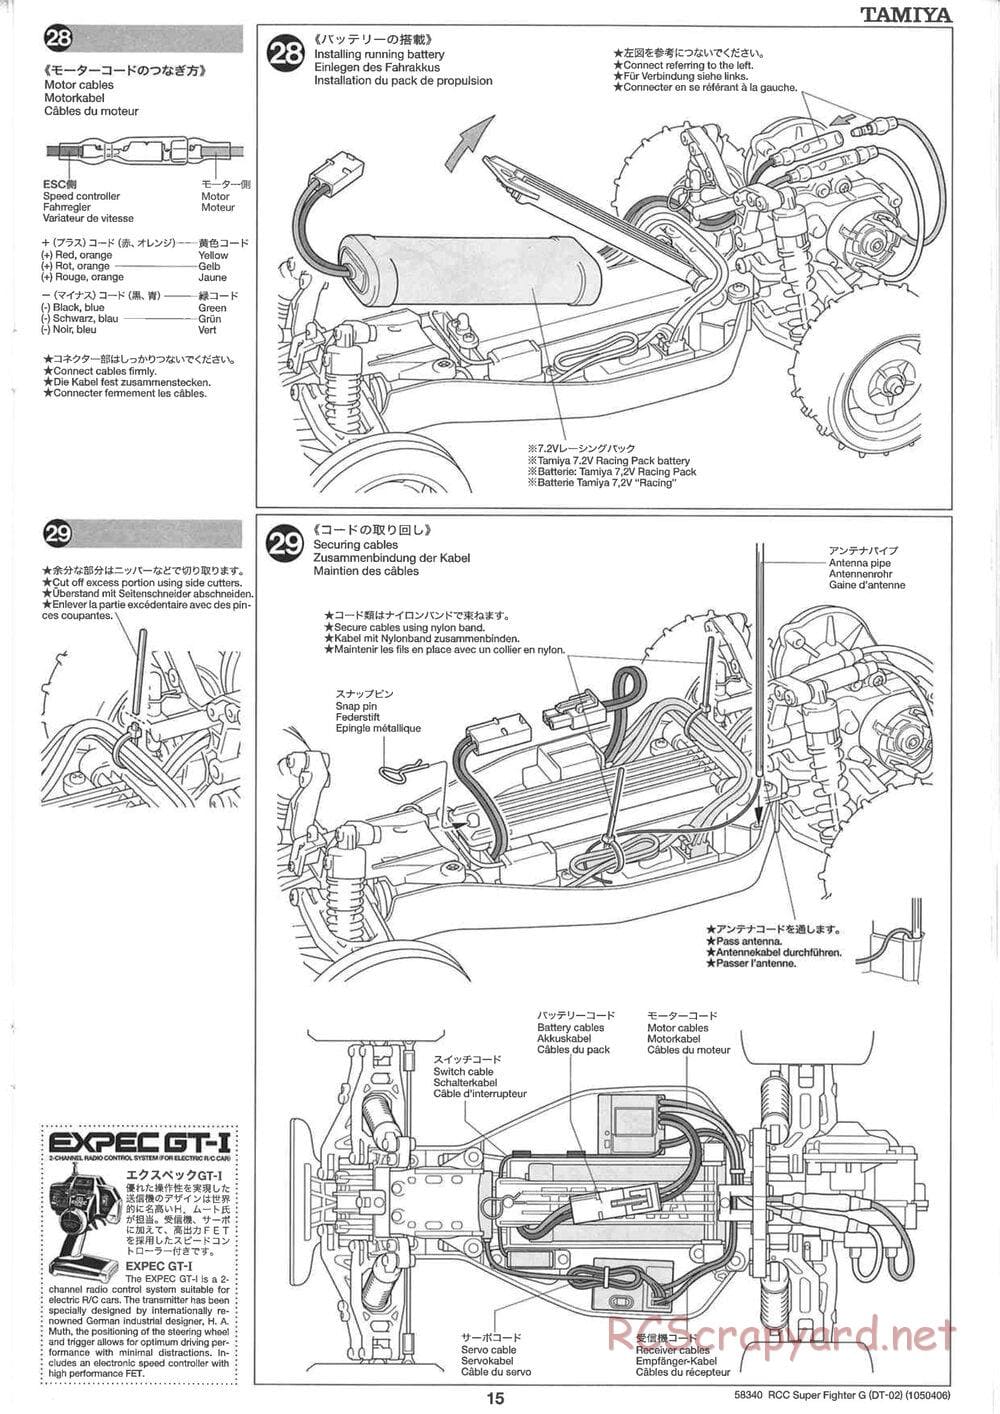 Tamiya - Super Fighter G Chassis - Manual - Page 15